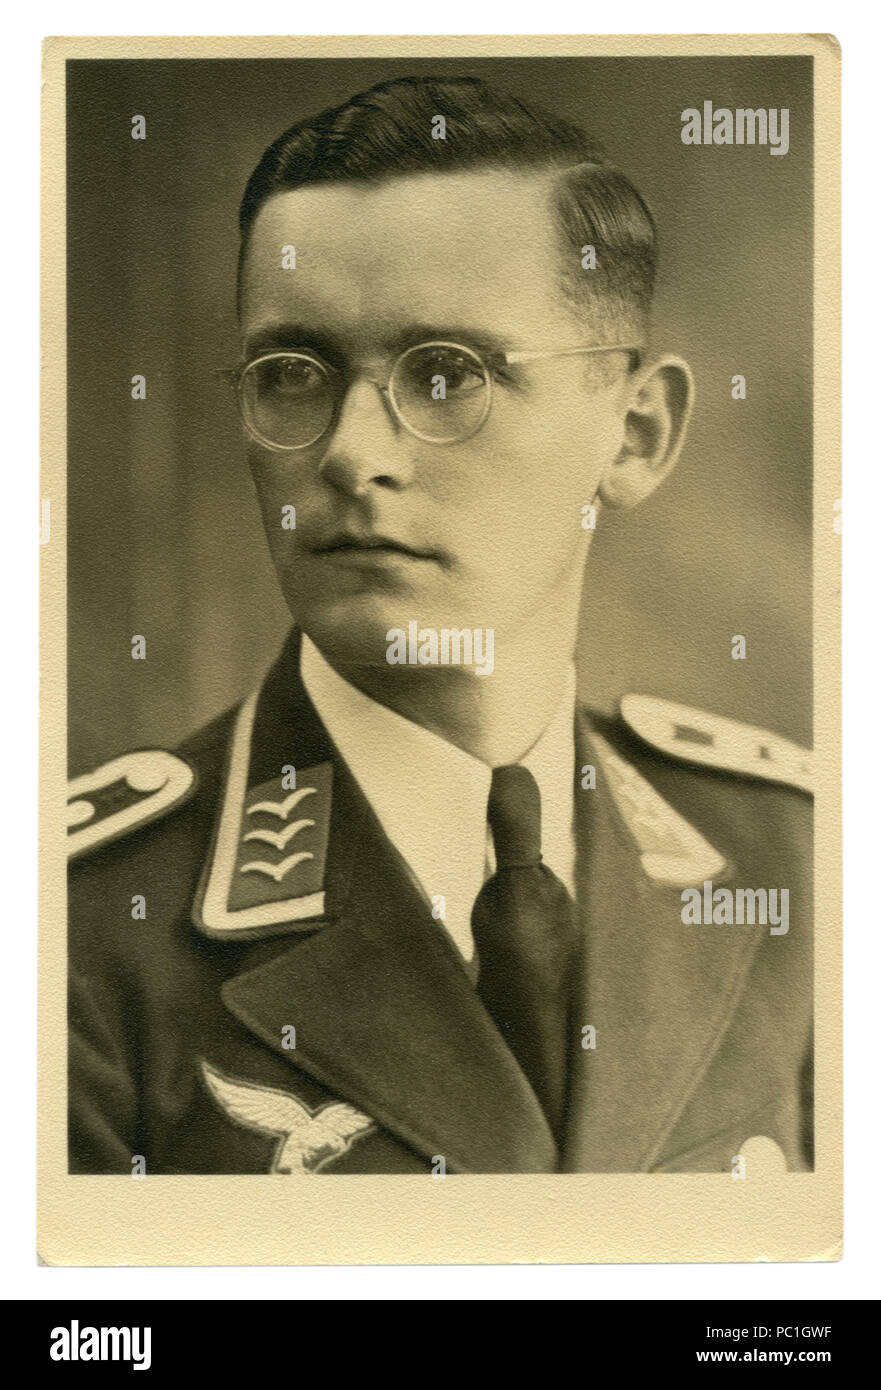 German historical photo: young handsome man,  sergeant major air force in military uniform, Luftwaffe, world war two, ww2, Germany, Third Reich Stock Photo